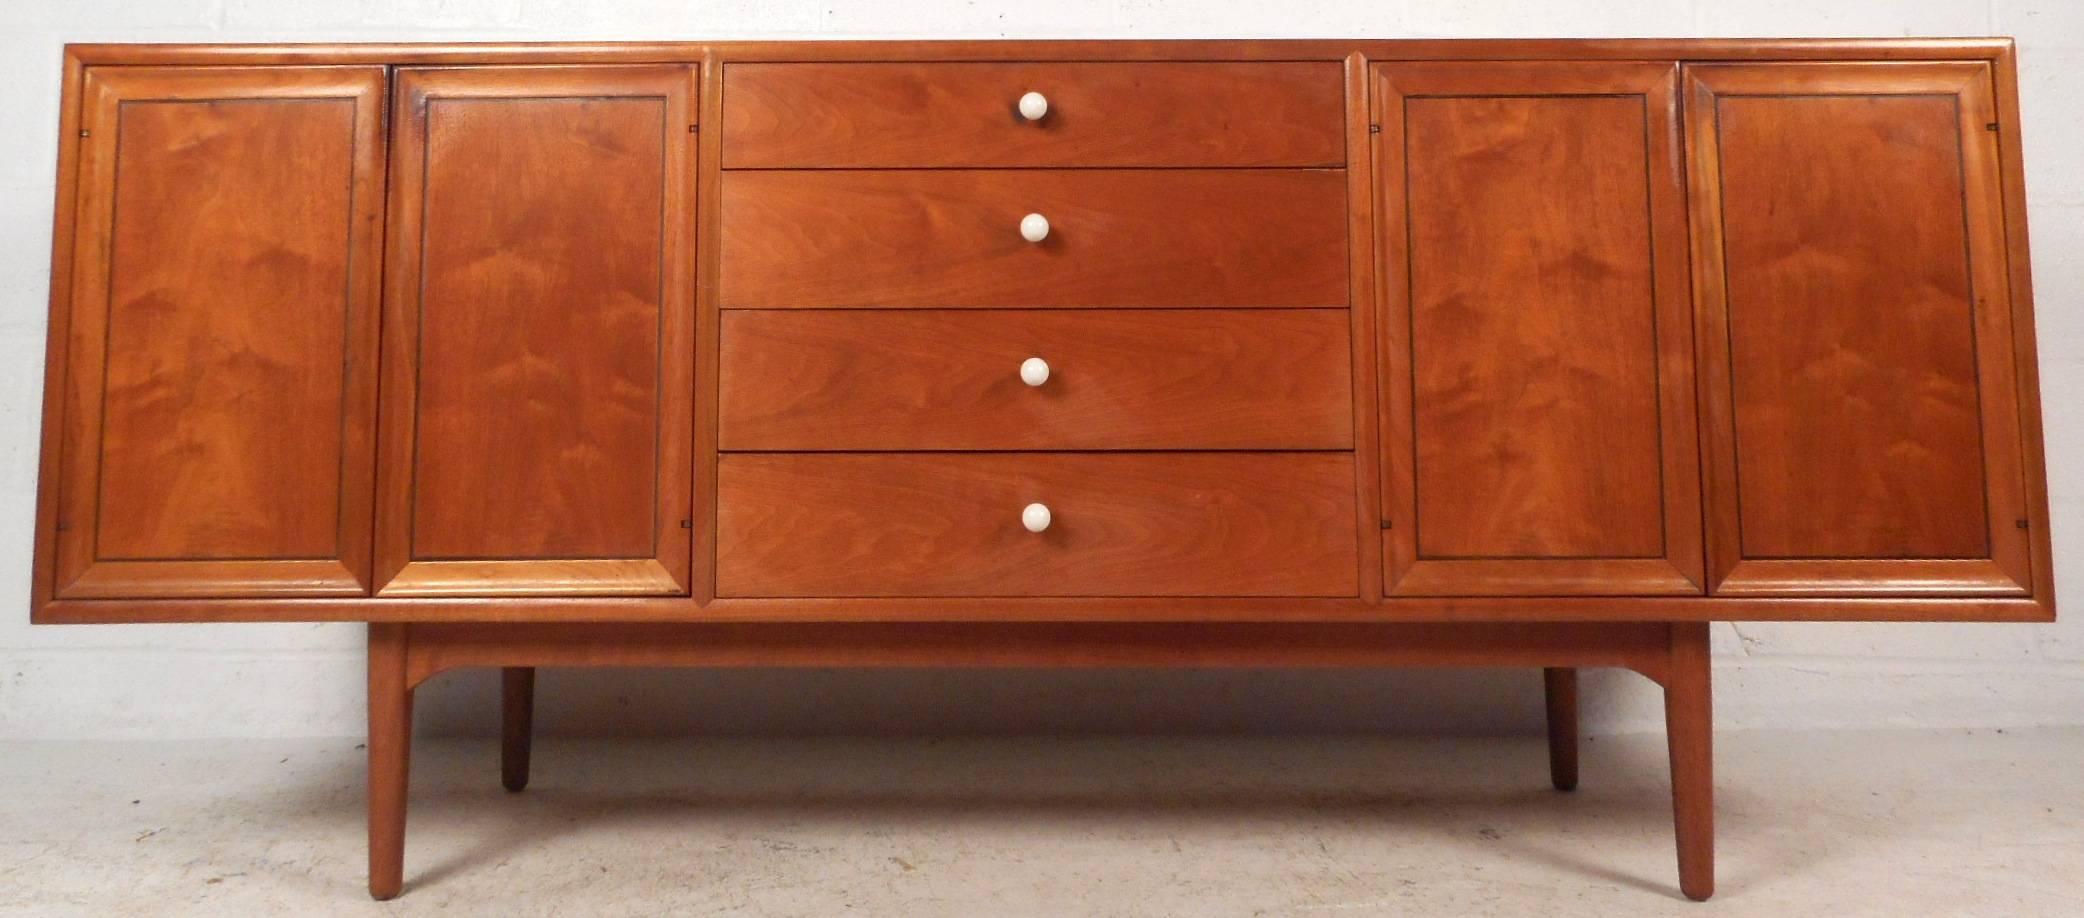 This beautiful vintage modern sideboard by Drexel features an abundance of storage space within its many drawers and compartments. Sleek design with four large drawers in the center and two cabinets that open up to unveil shelves. The unique round